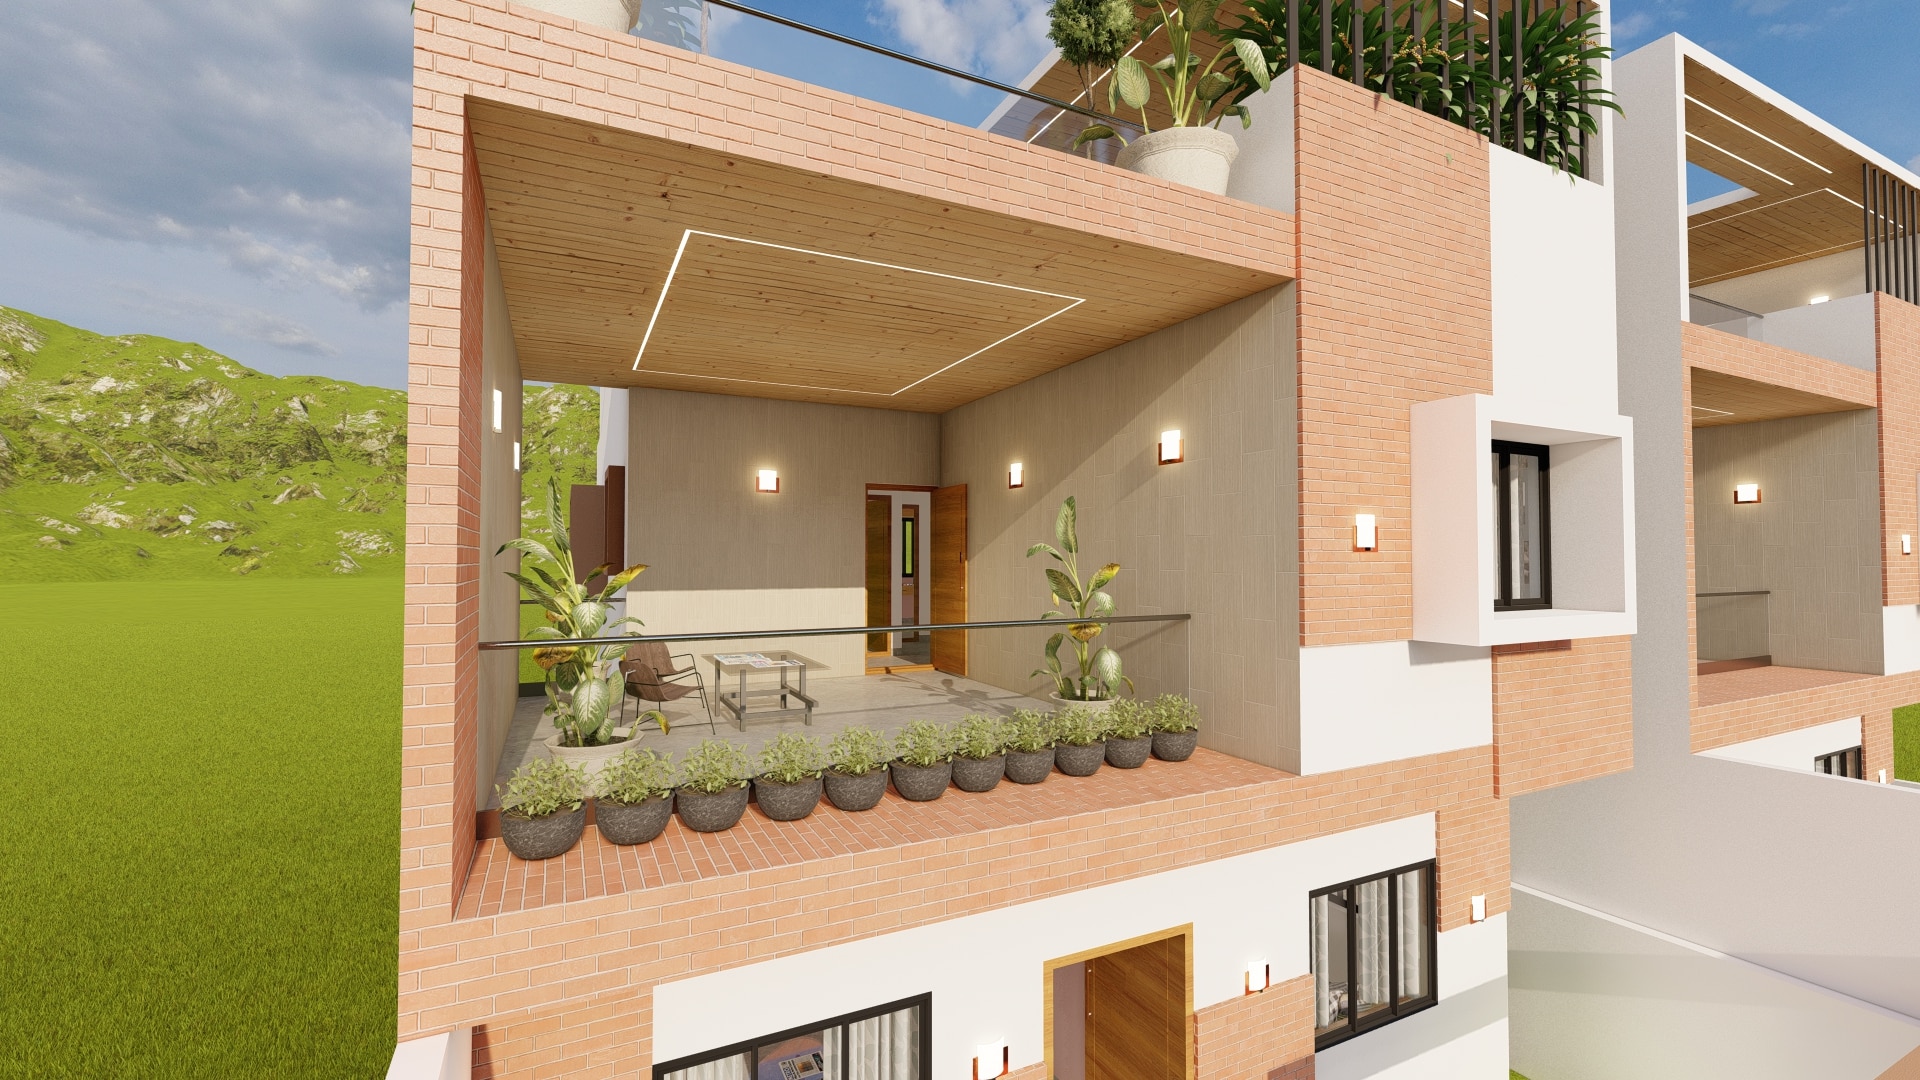 covered terrace deck new bungalow home design west facing 30x50 sq ft urban terrace